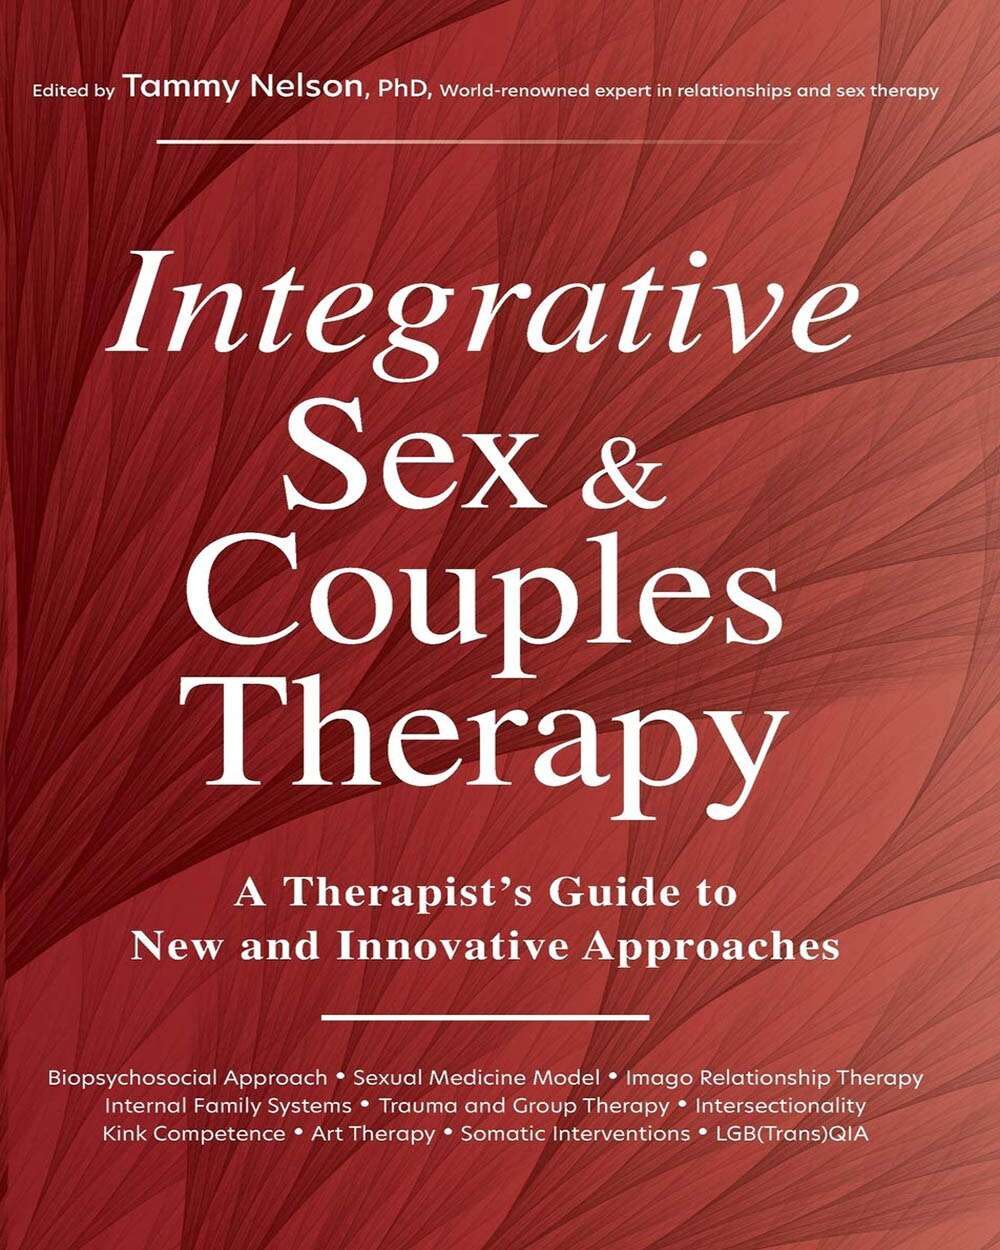 Integrative Sex And Couples Therapy A Therapists Guide To New And Innovative Approaches Ouzod 7345